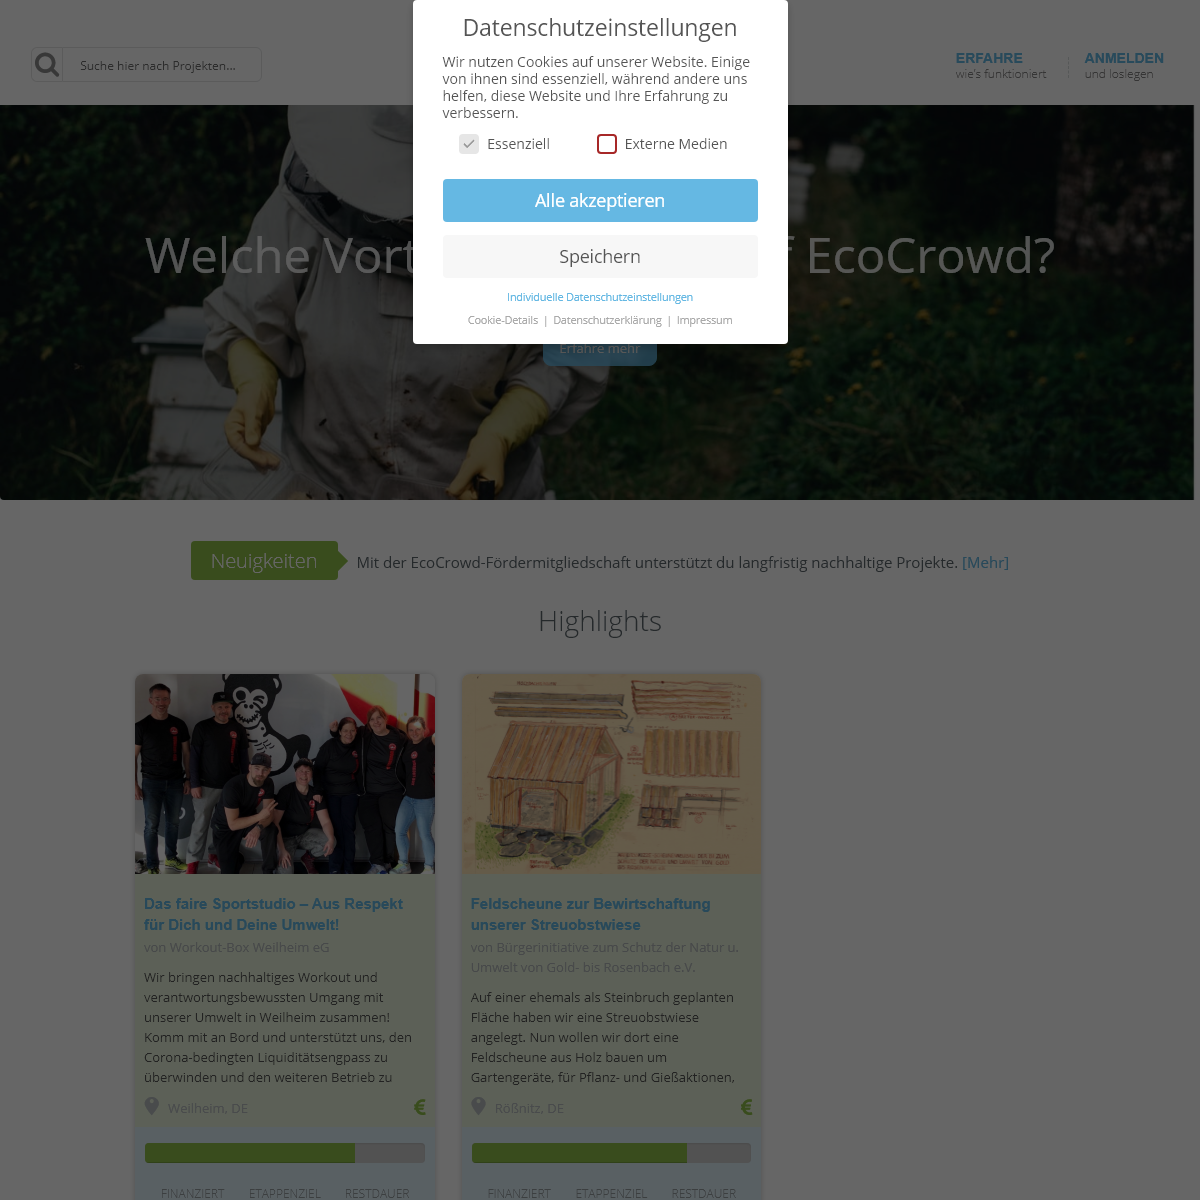 A complete backup of ecocrowd.de